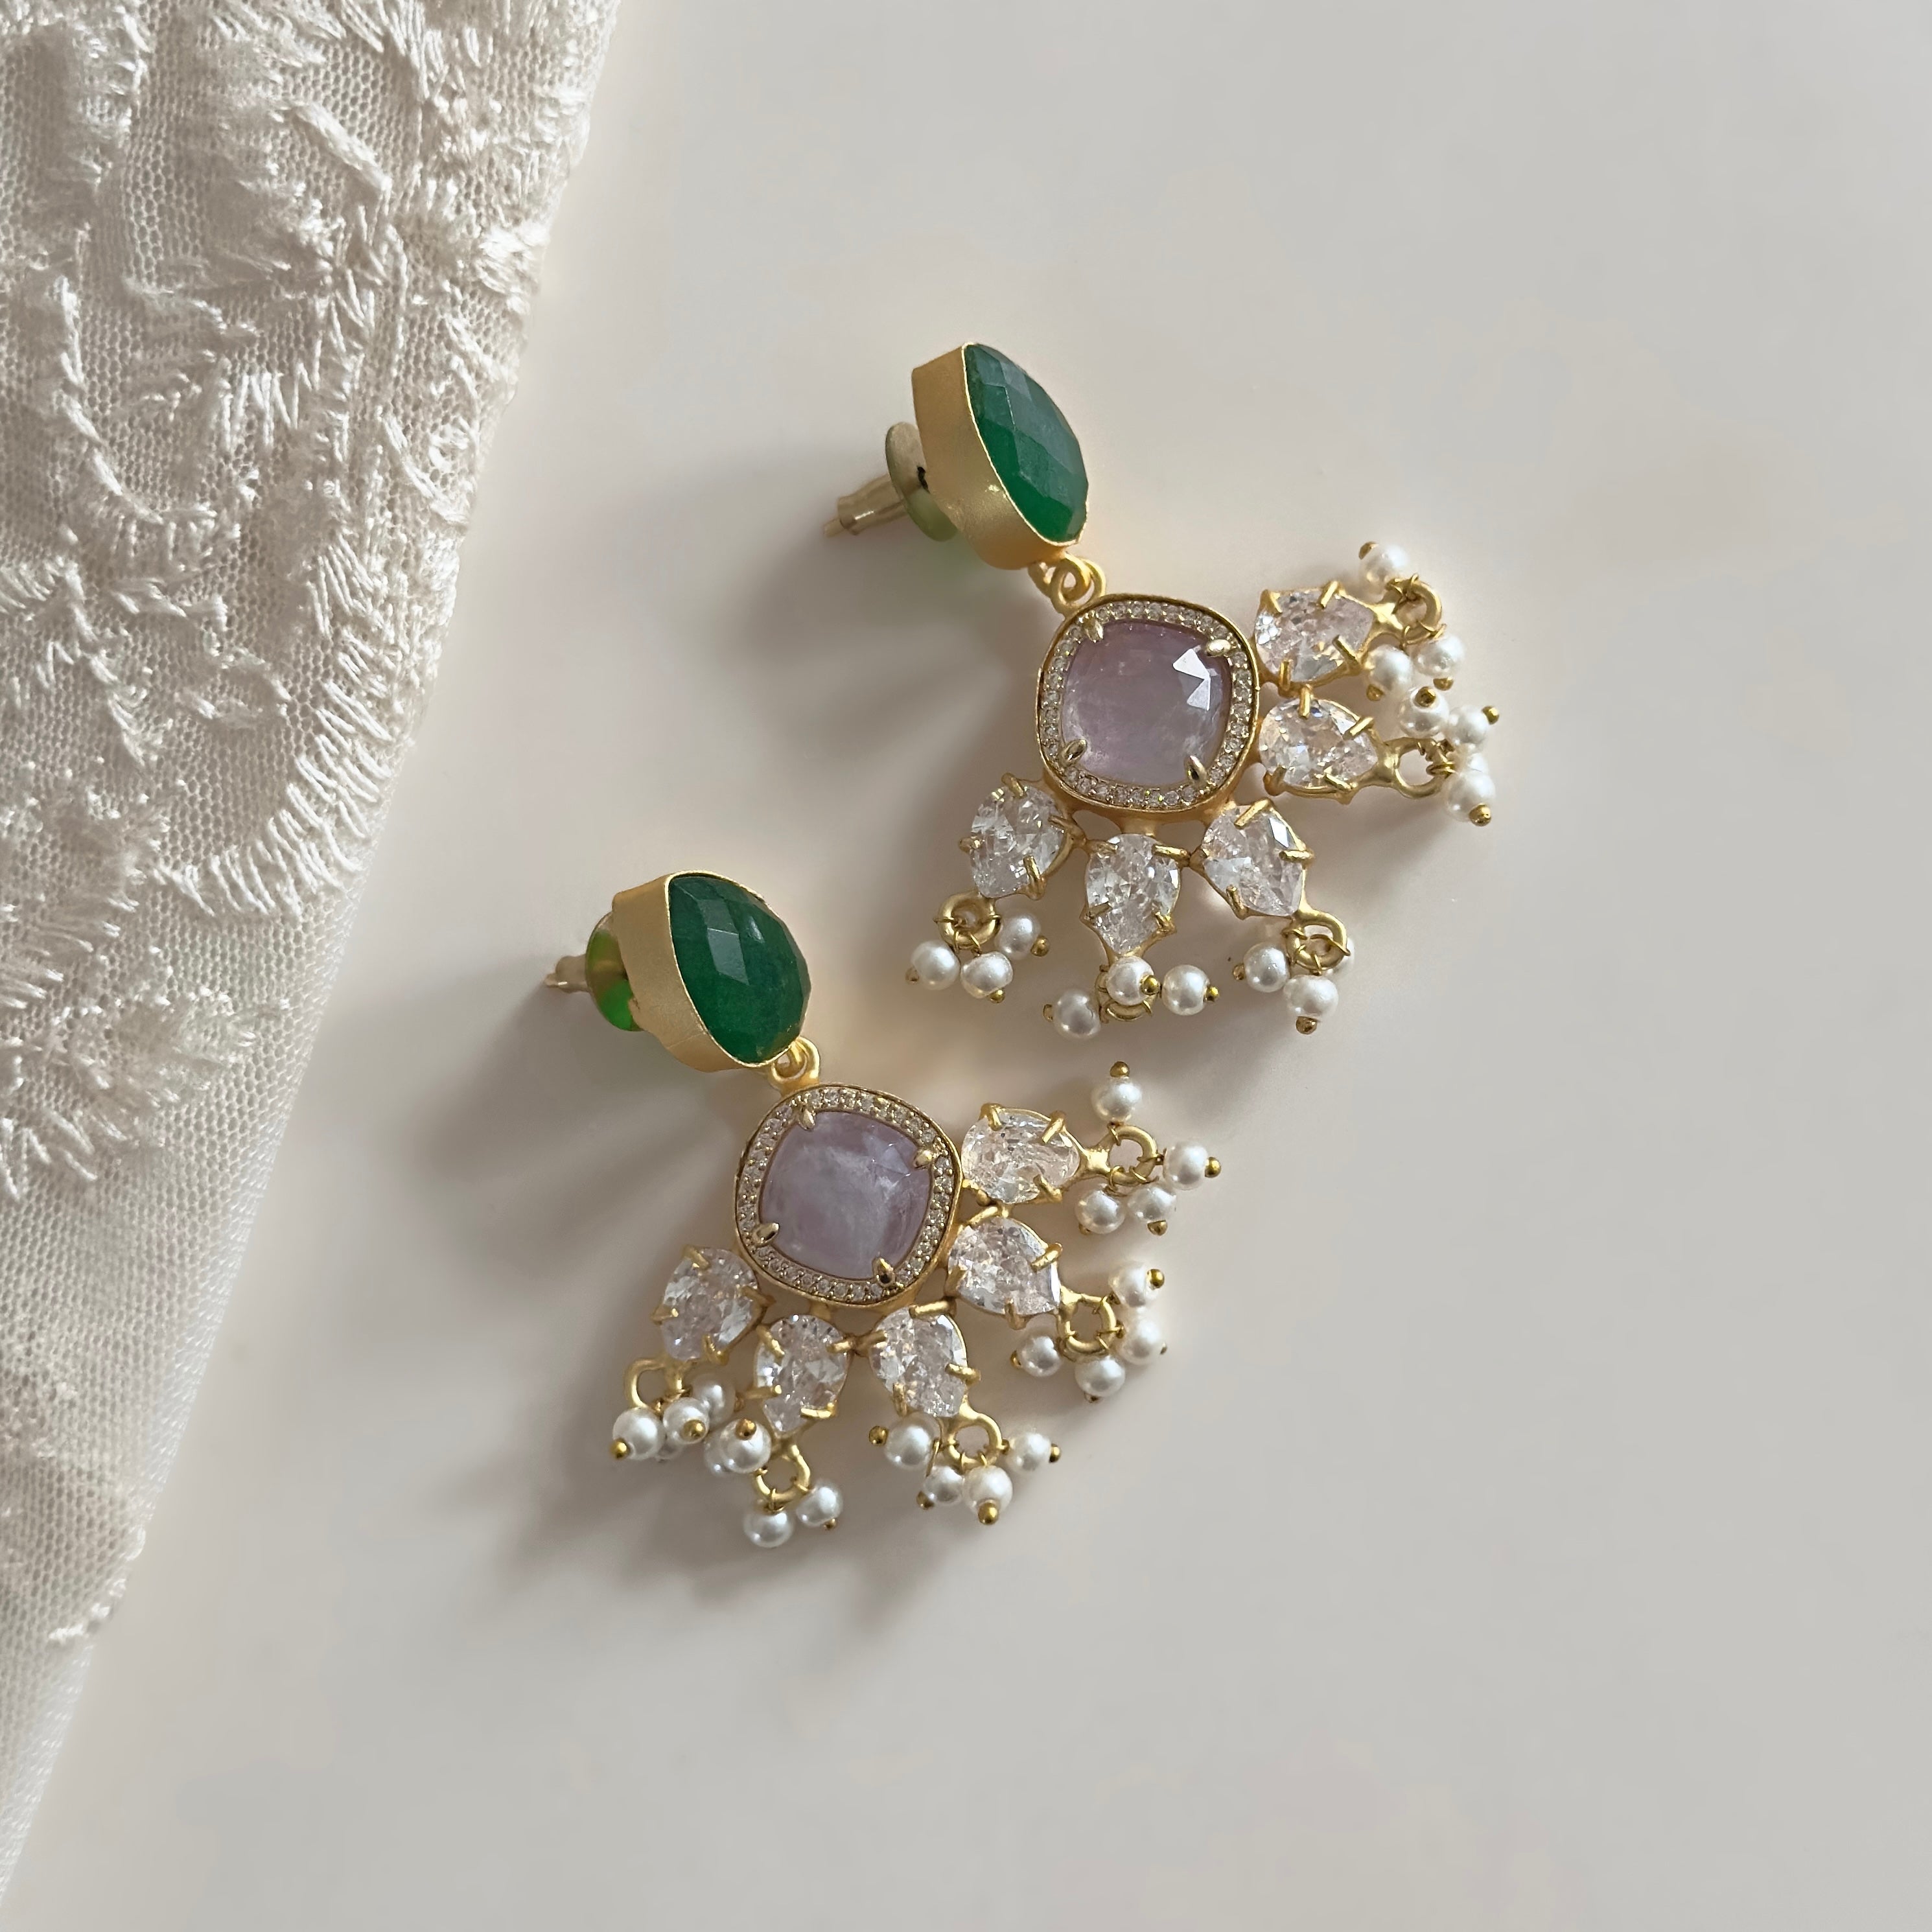 These Harper Green Drop Earrings feature a stunning mix of green and lilac hues, creating a striking and versatile accessory. Adorned with cz crystals, these earrings add an elegant sparkle to any outfit. Elevate your style with these must-have earrings!